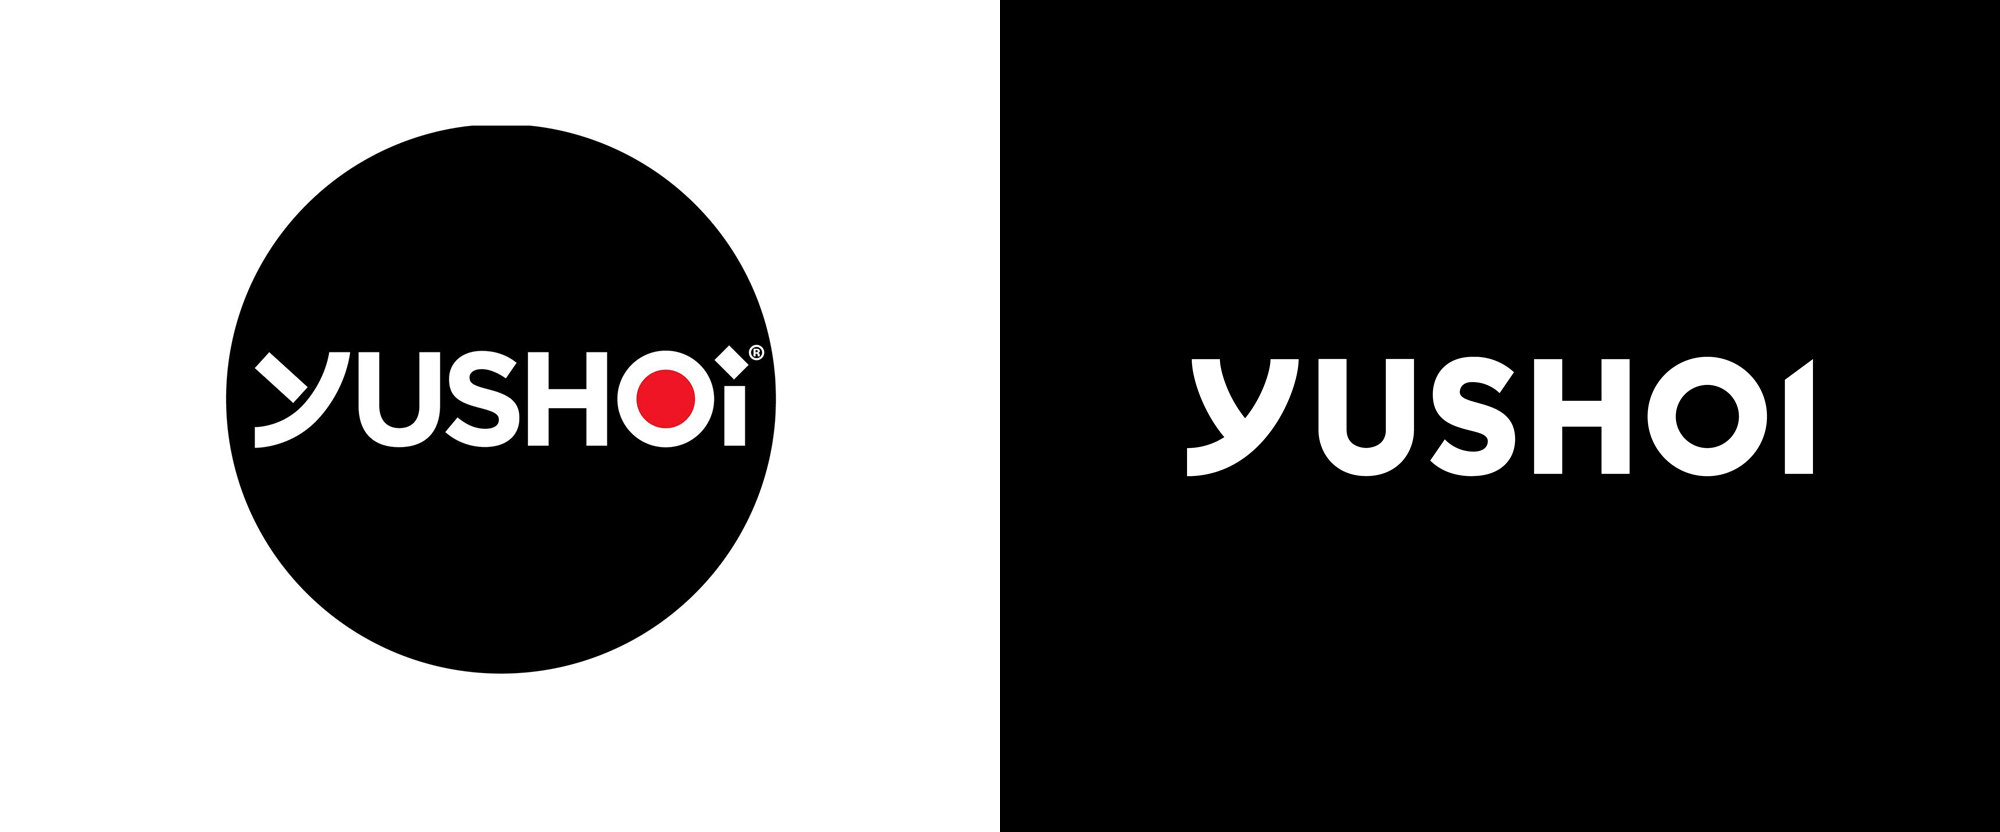 New Logo and Packaging for Yushoi by Elmwood